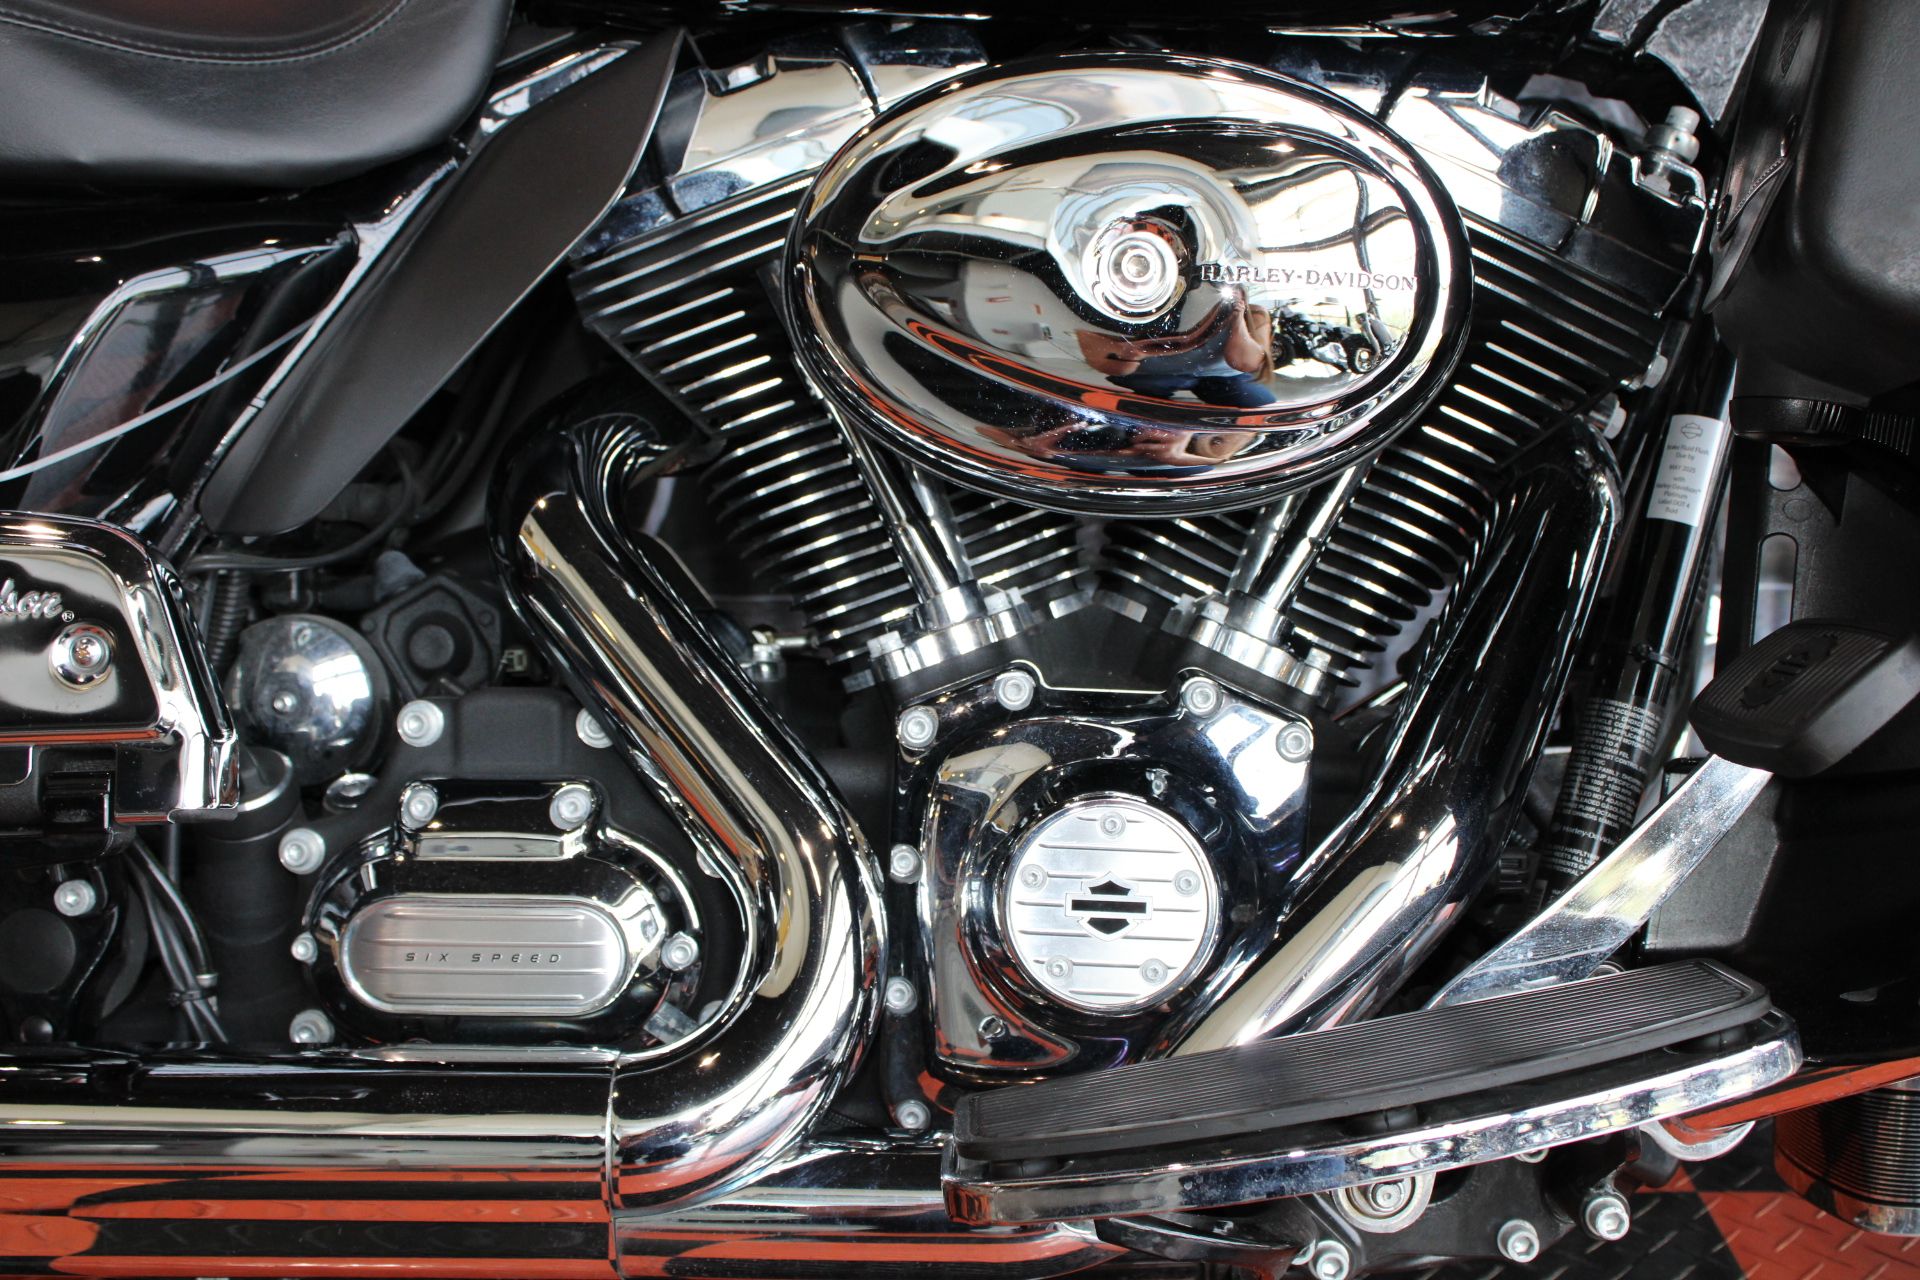 2013 Harley-Davidson Electra Glide® Ultra Limited in Shorewood, Illinois - Photo 7